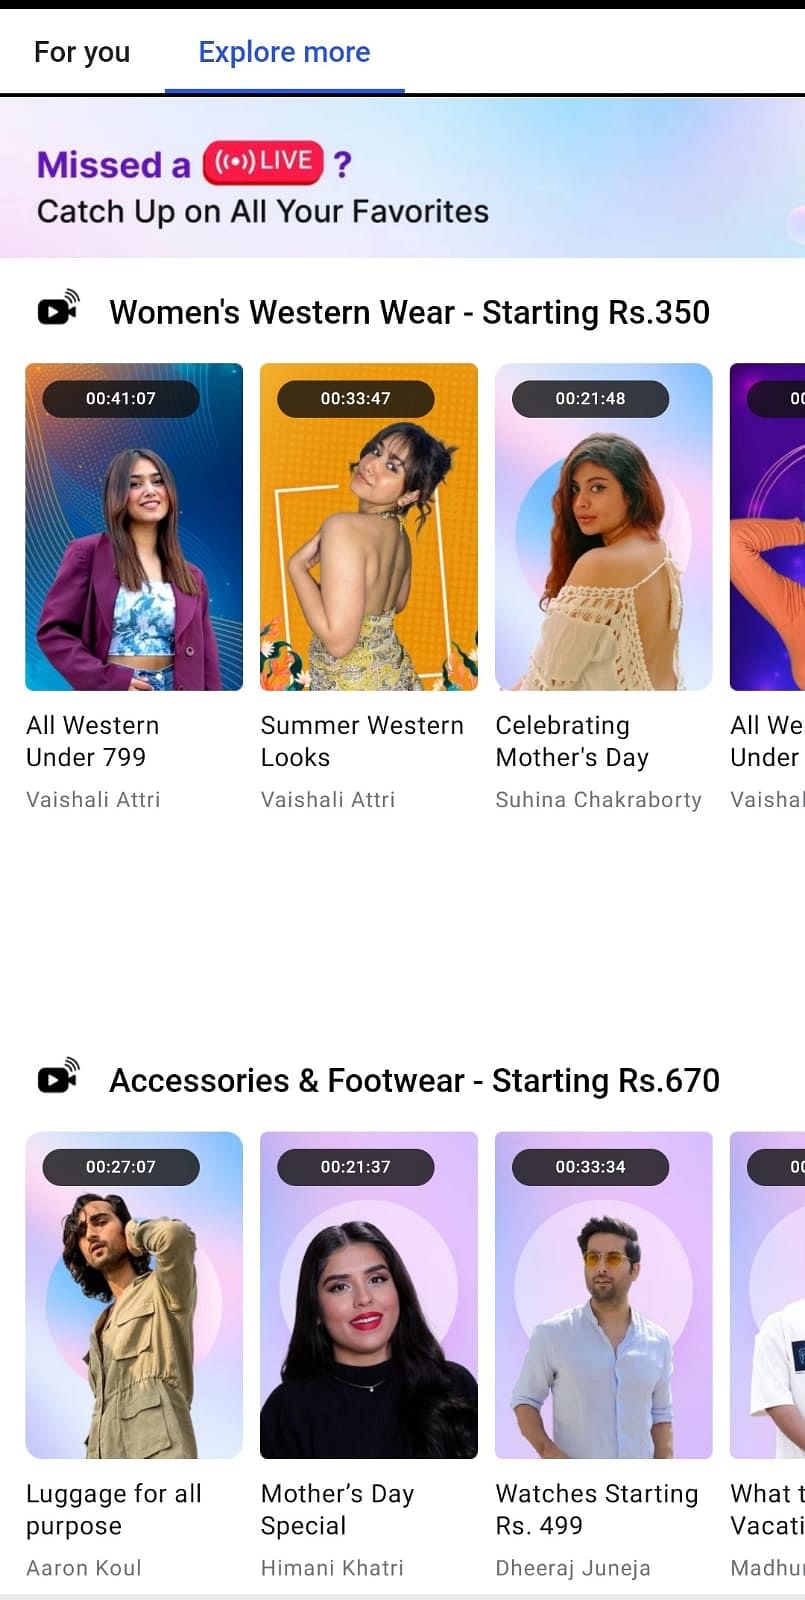 Live streams that can be viewed on the Flipkart app